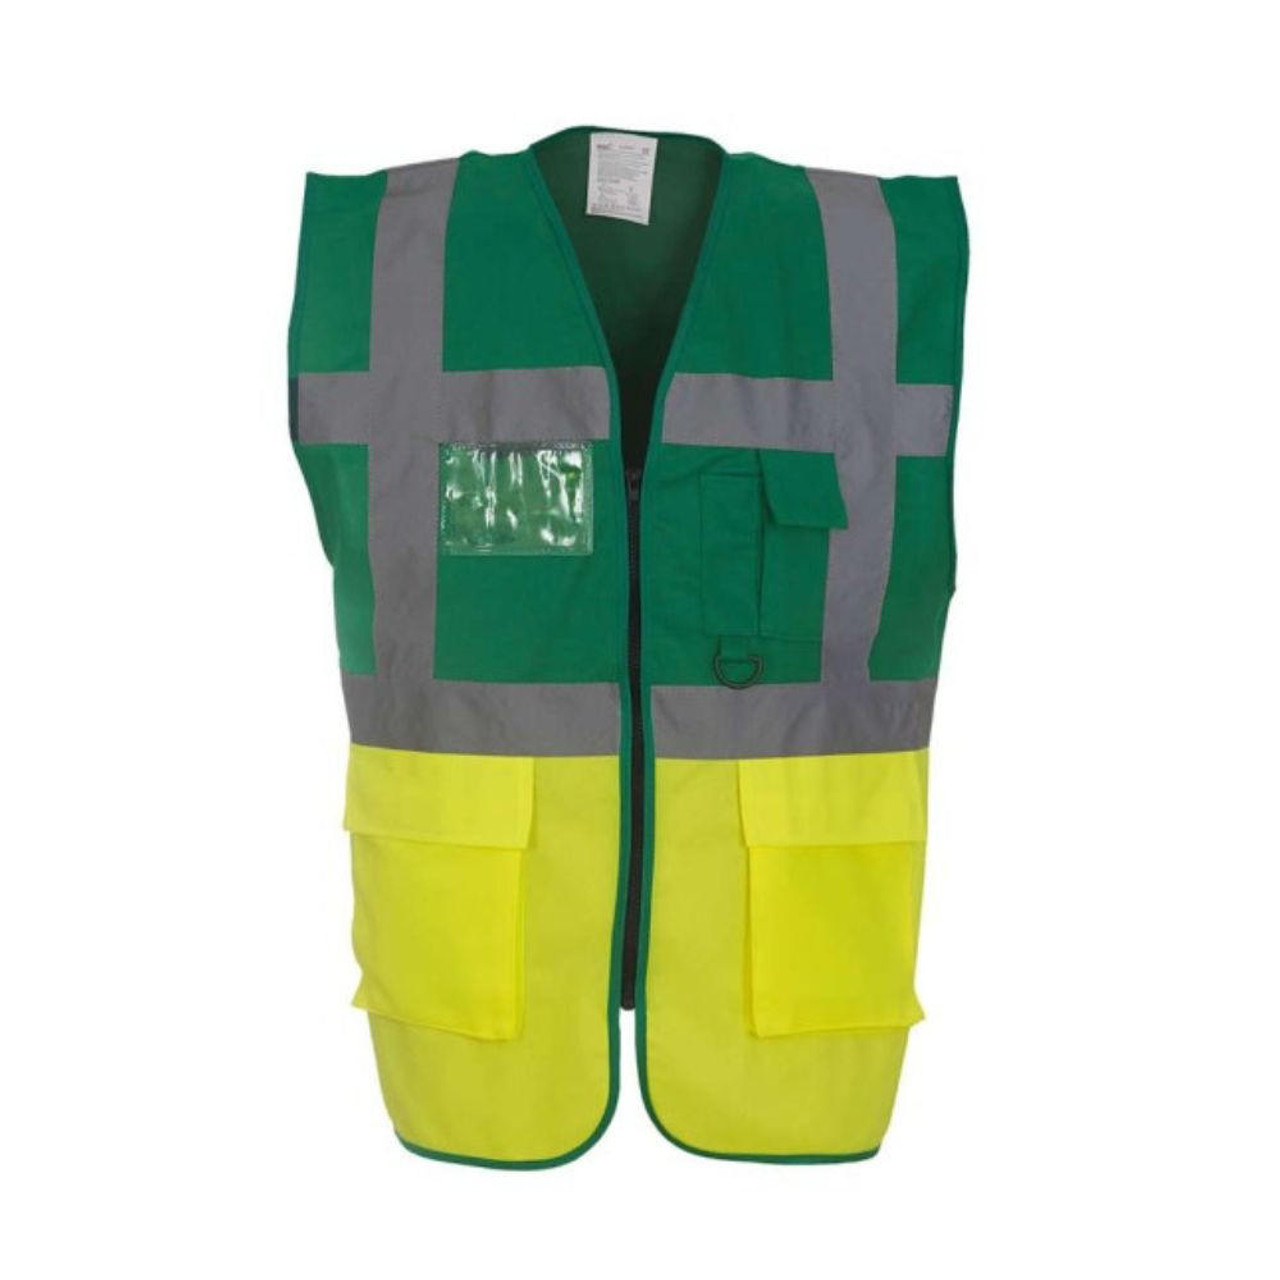  High Vis Vest Waistcoat With Pockets for Paramedics and Medic Green Yellow 